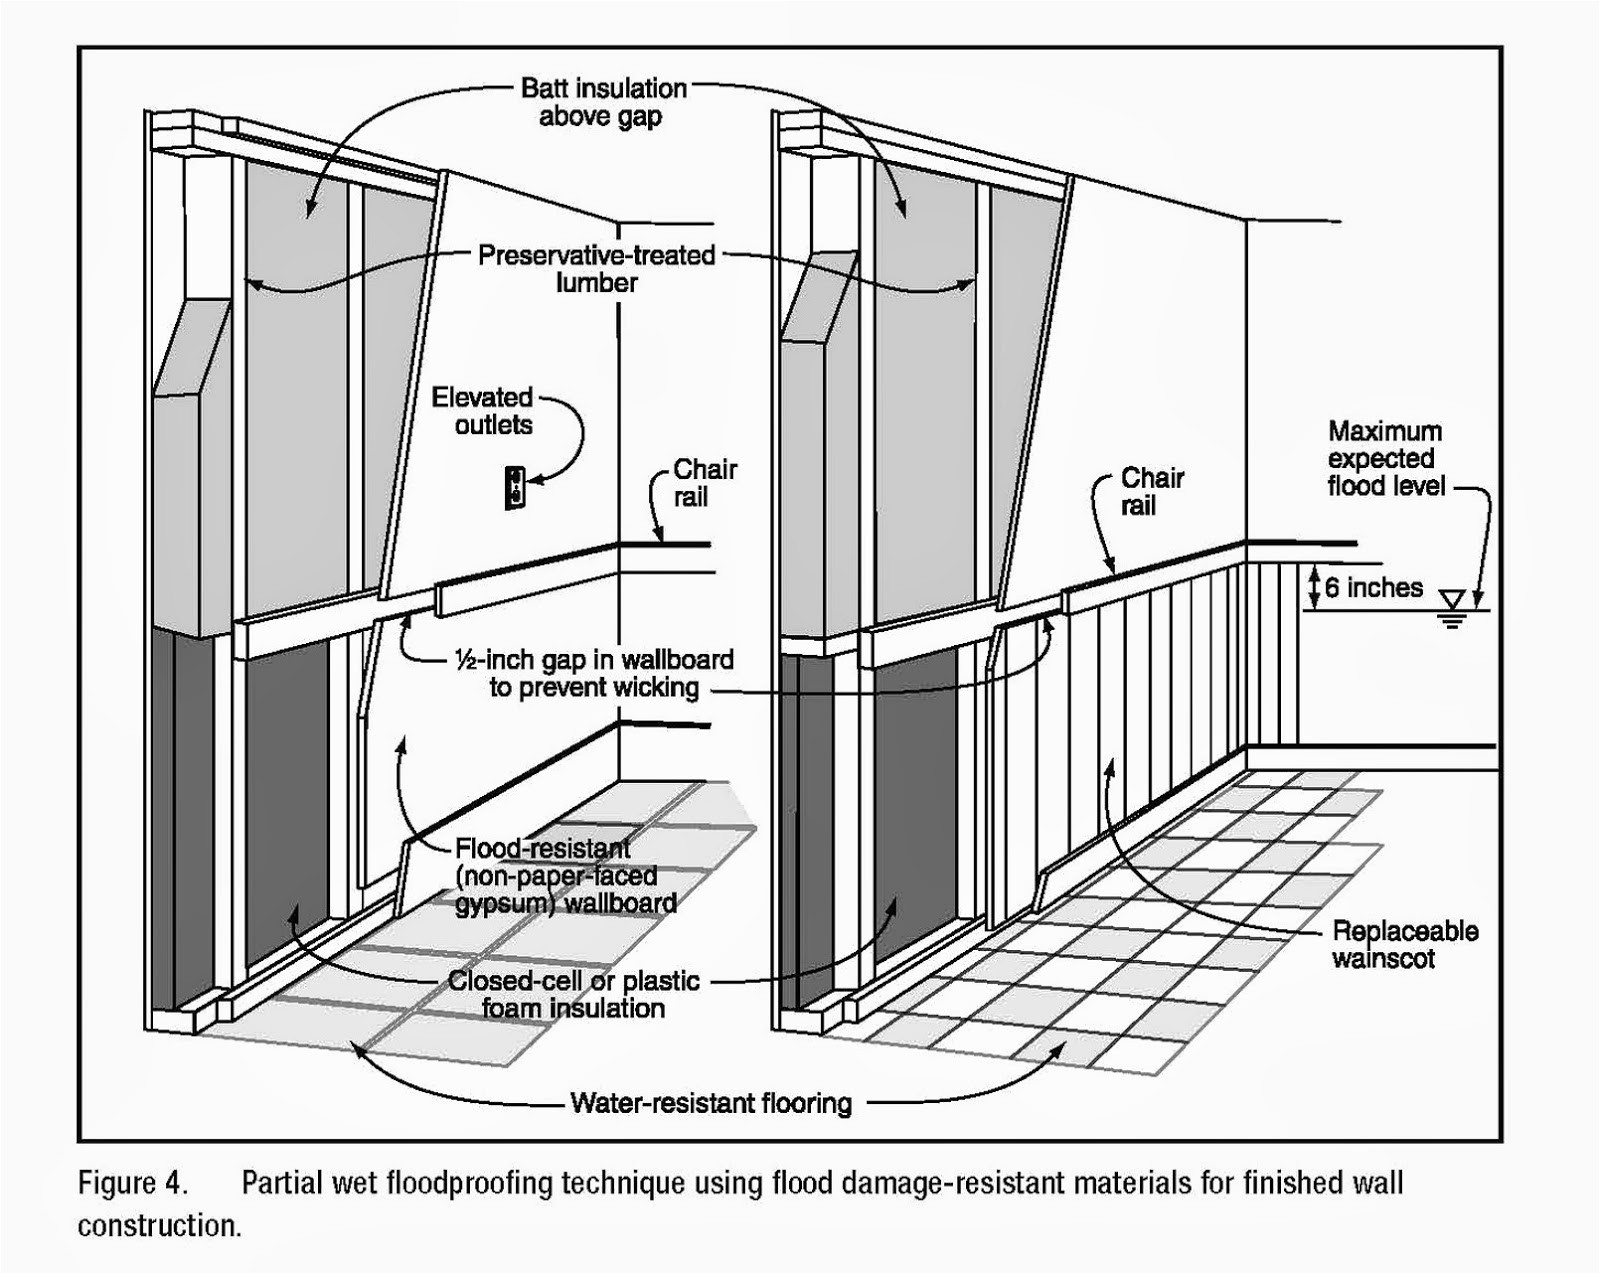 fema illustration showing how to construct a floodproof wall